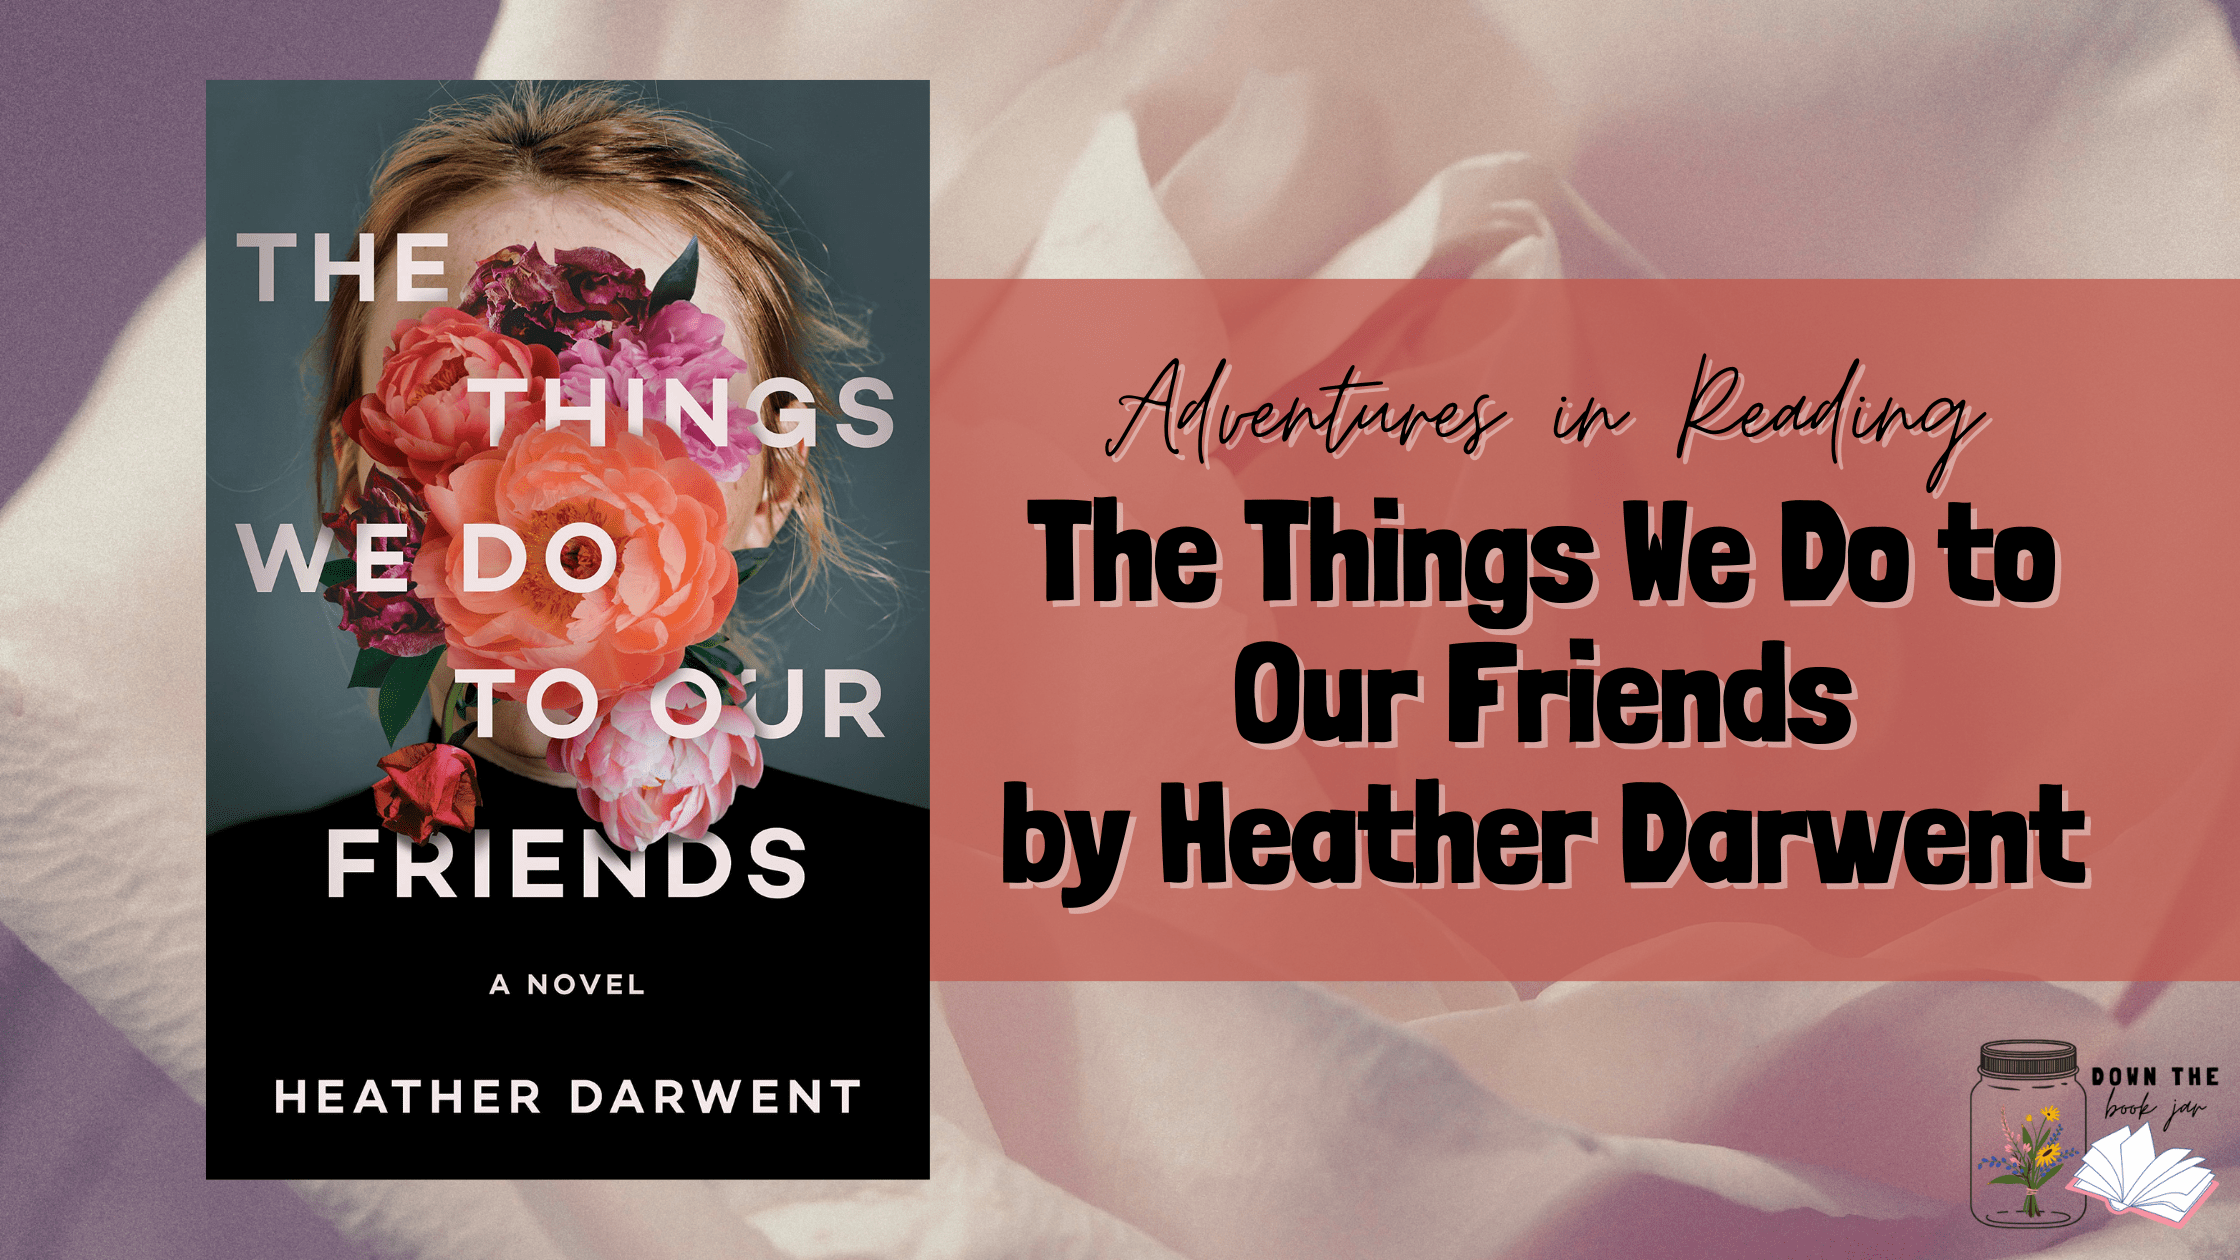 The Things We Do to Our Friends by Heather Darwent